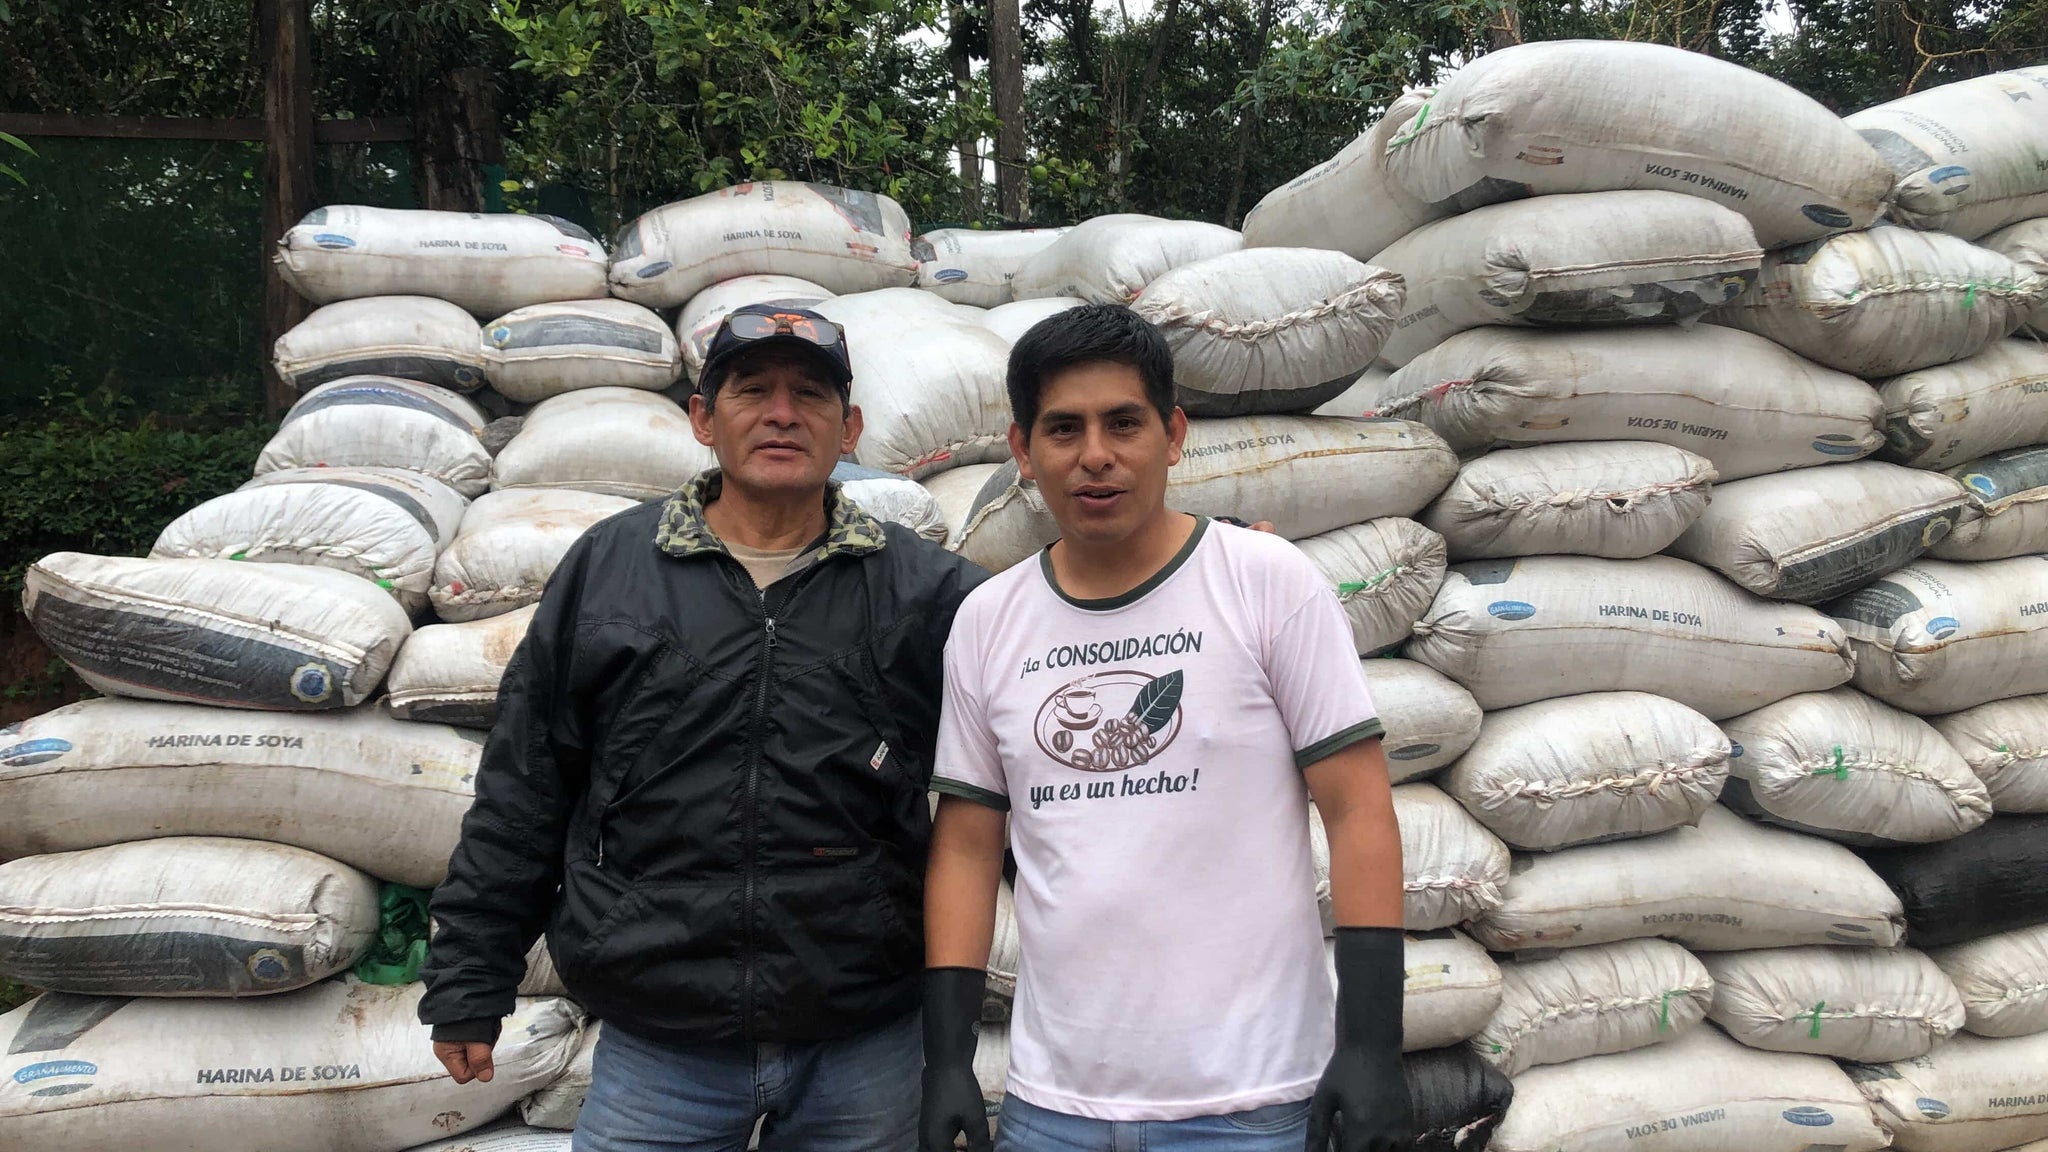 Picutre of 2 farmers from chacra d'dago biodynamic farm in villa rica peru behind a lot of packed green coffee